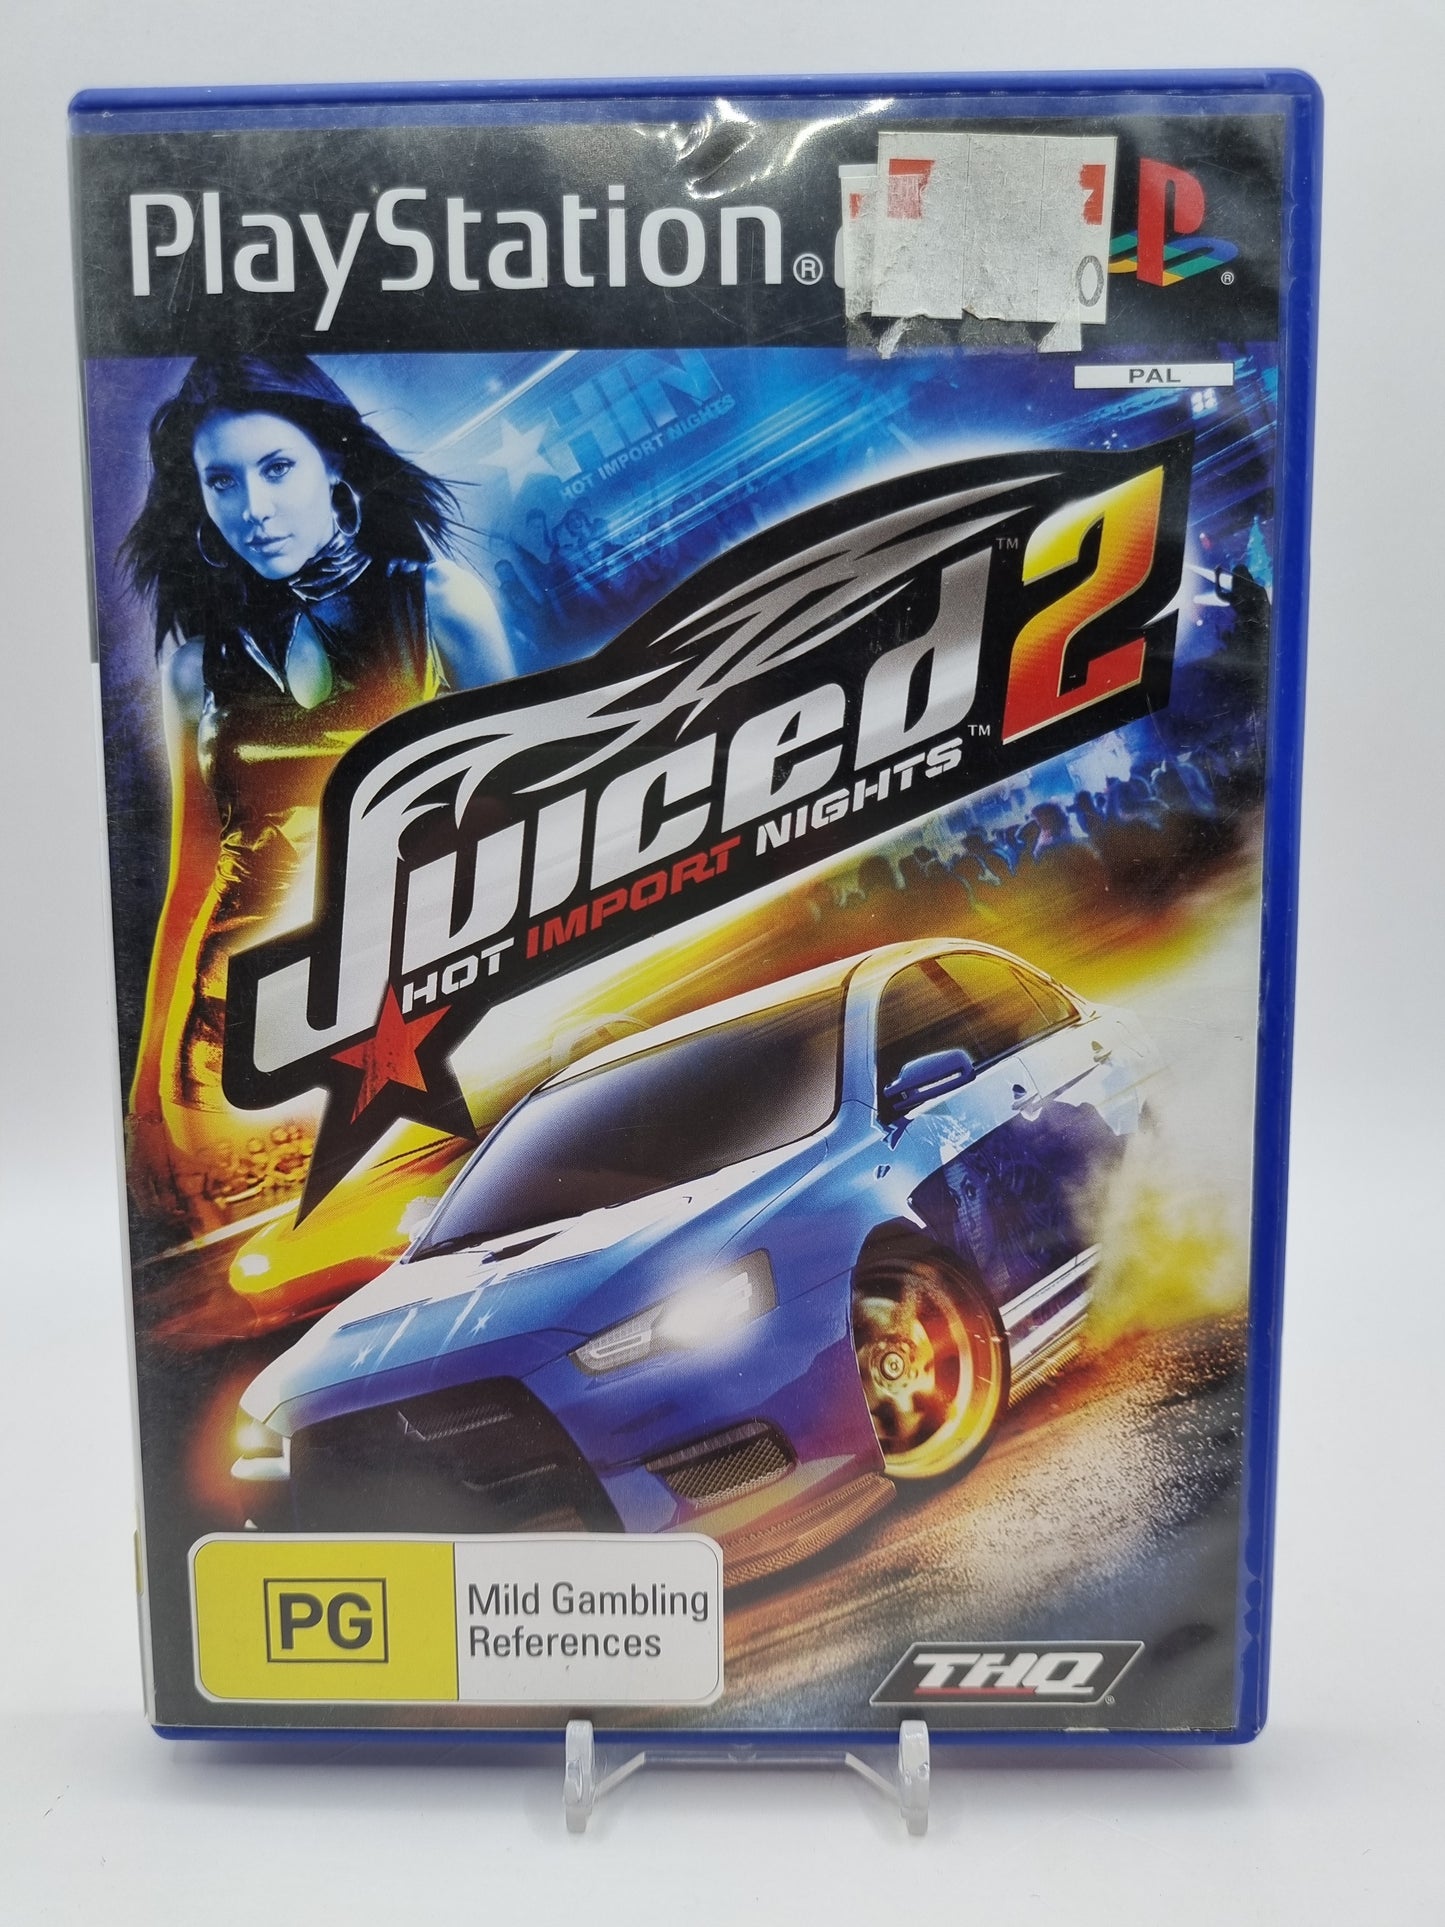 Juiced 2 Hot Import Nights PS2